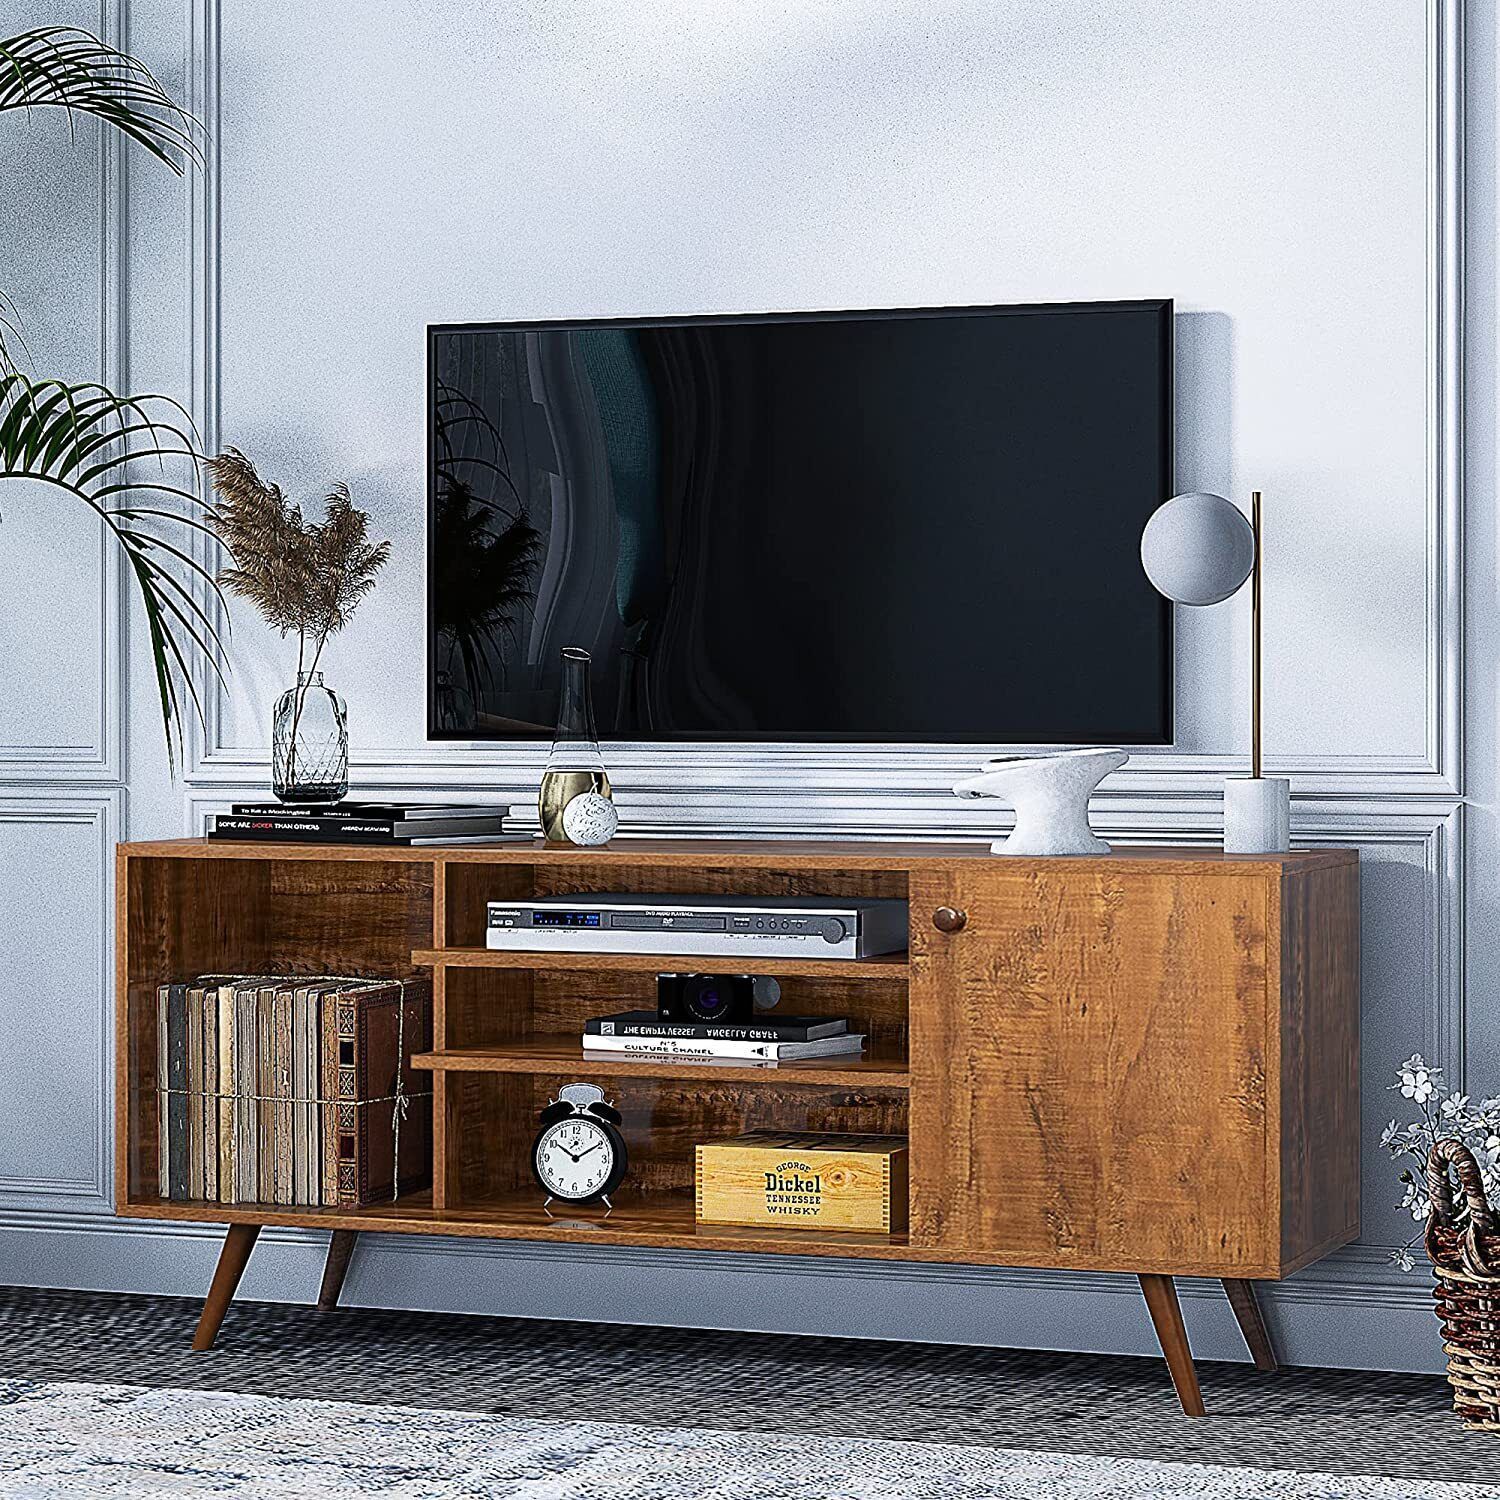 Mid Century Modern Tv Stand Modern Entertainment Center Wood Television  Stands | Ebay Pertaining To Mid Century Entertainment Centers (View 5 of 15)